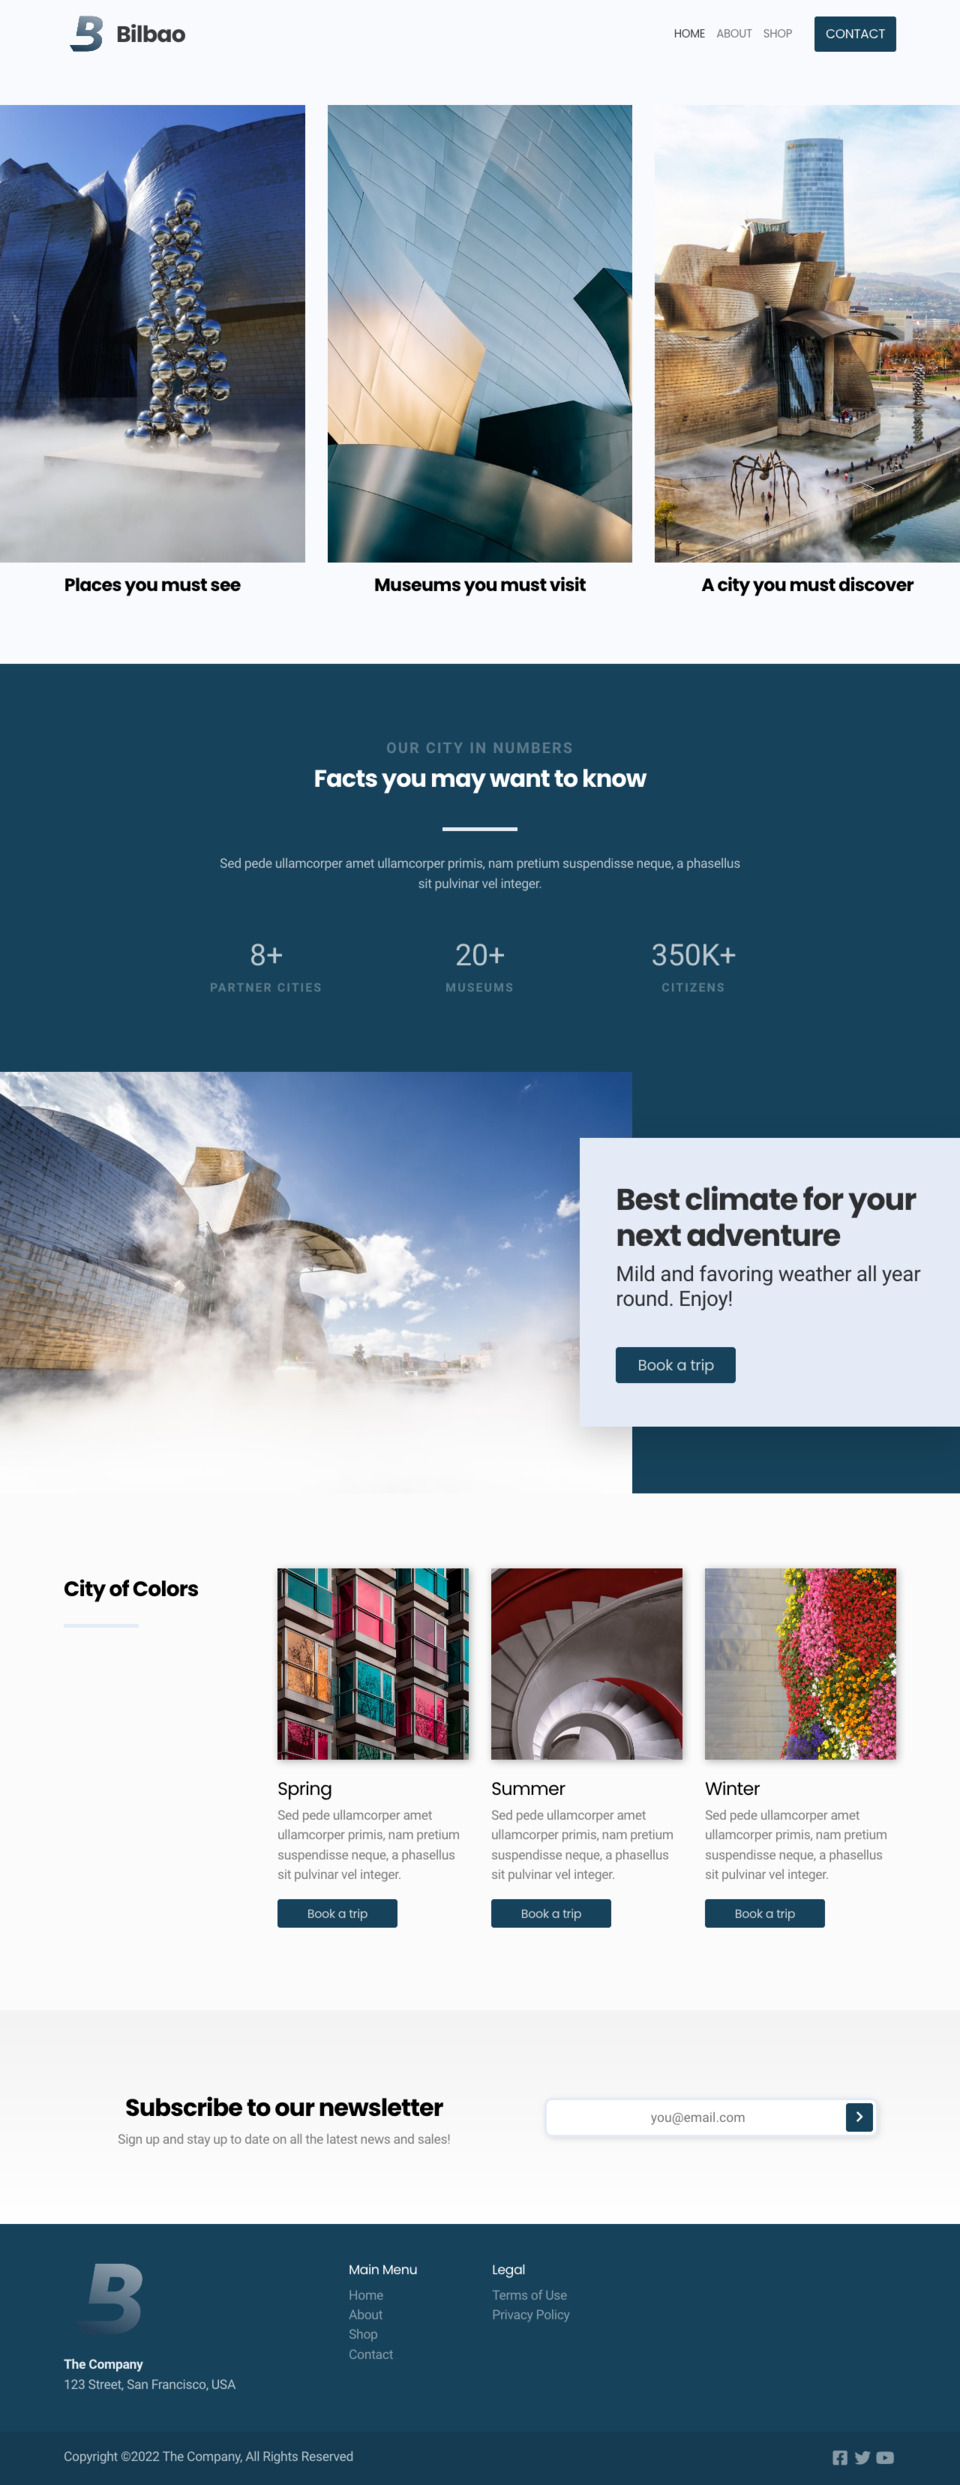 Bilbao Website Template - Ideal for small businesses offering city tour services, travel agencies, or anyone looking to create a visually appealing website for travel experiences.